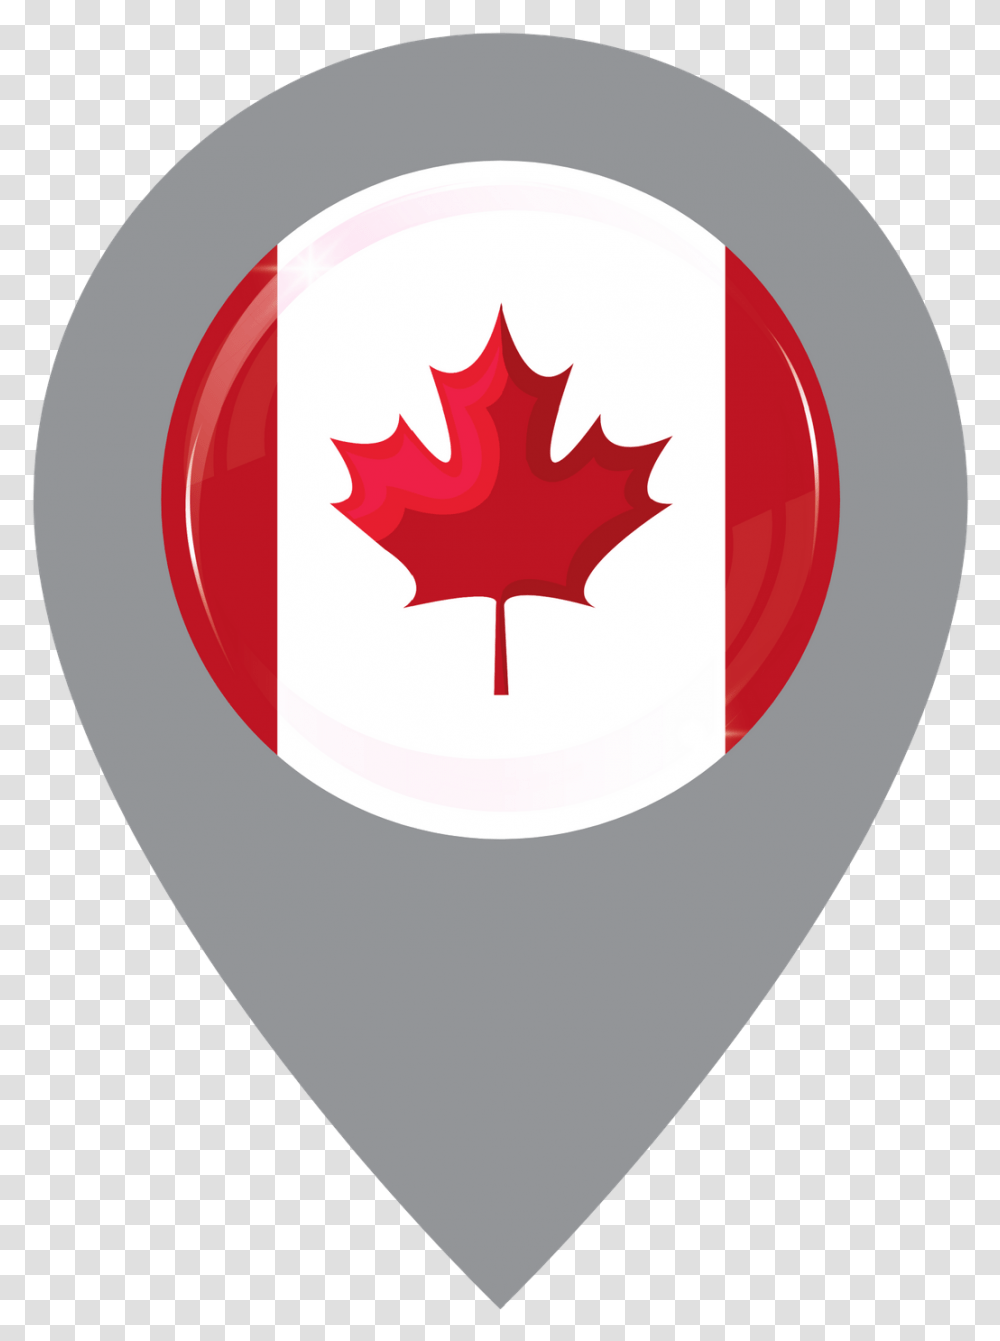 Ipac Directory Usa Pros Canada Day Gif Heart, Leaf, Plant, Tree, Plectrum Transparent Png